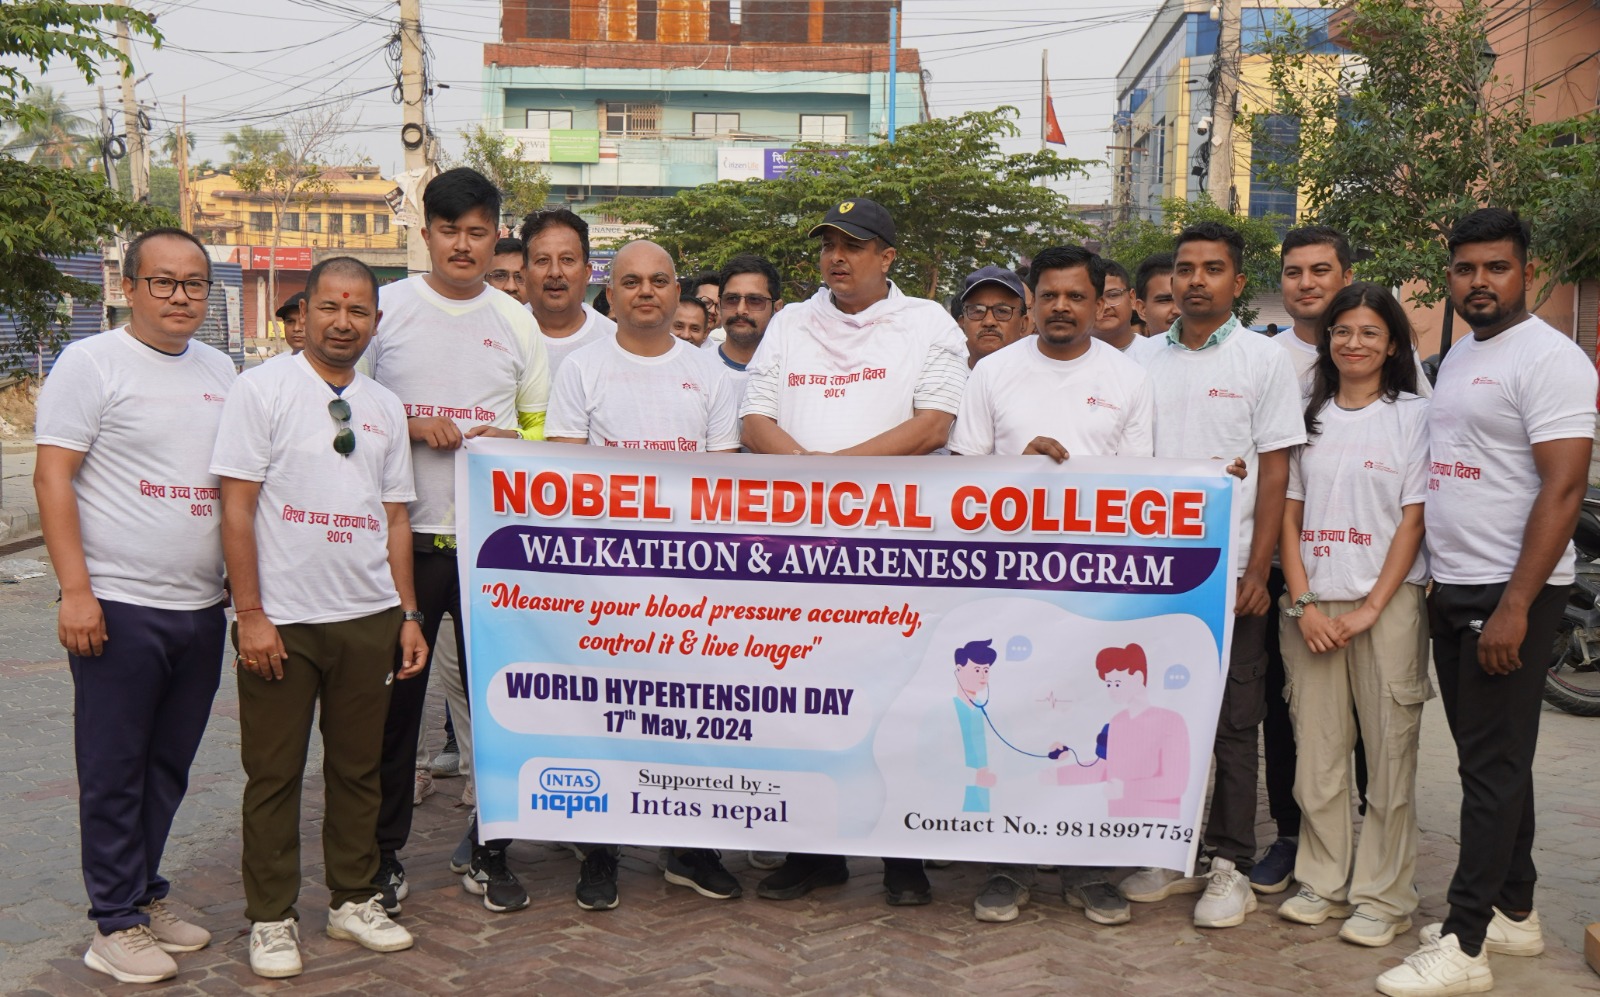 In pics: Nobel Medical College’s awareness rally for World Hypertension Day